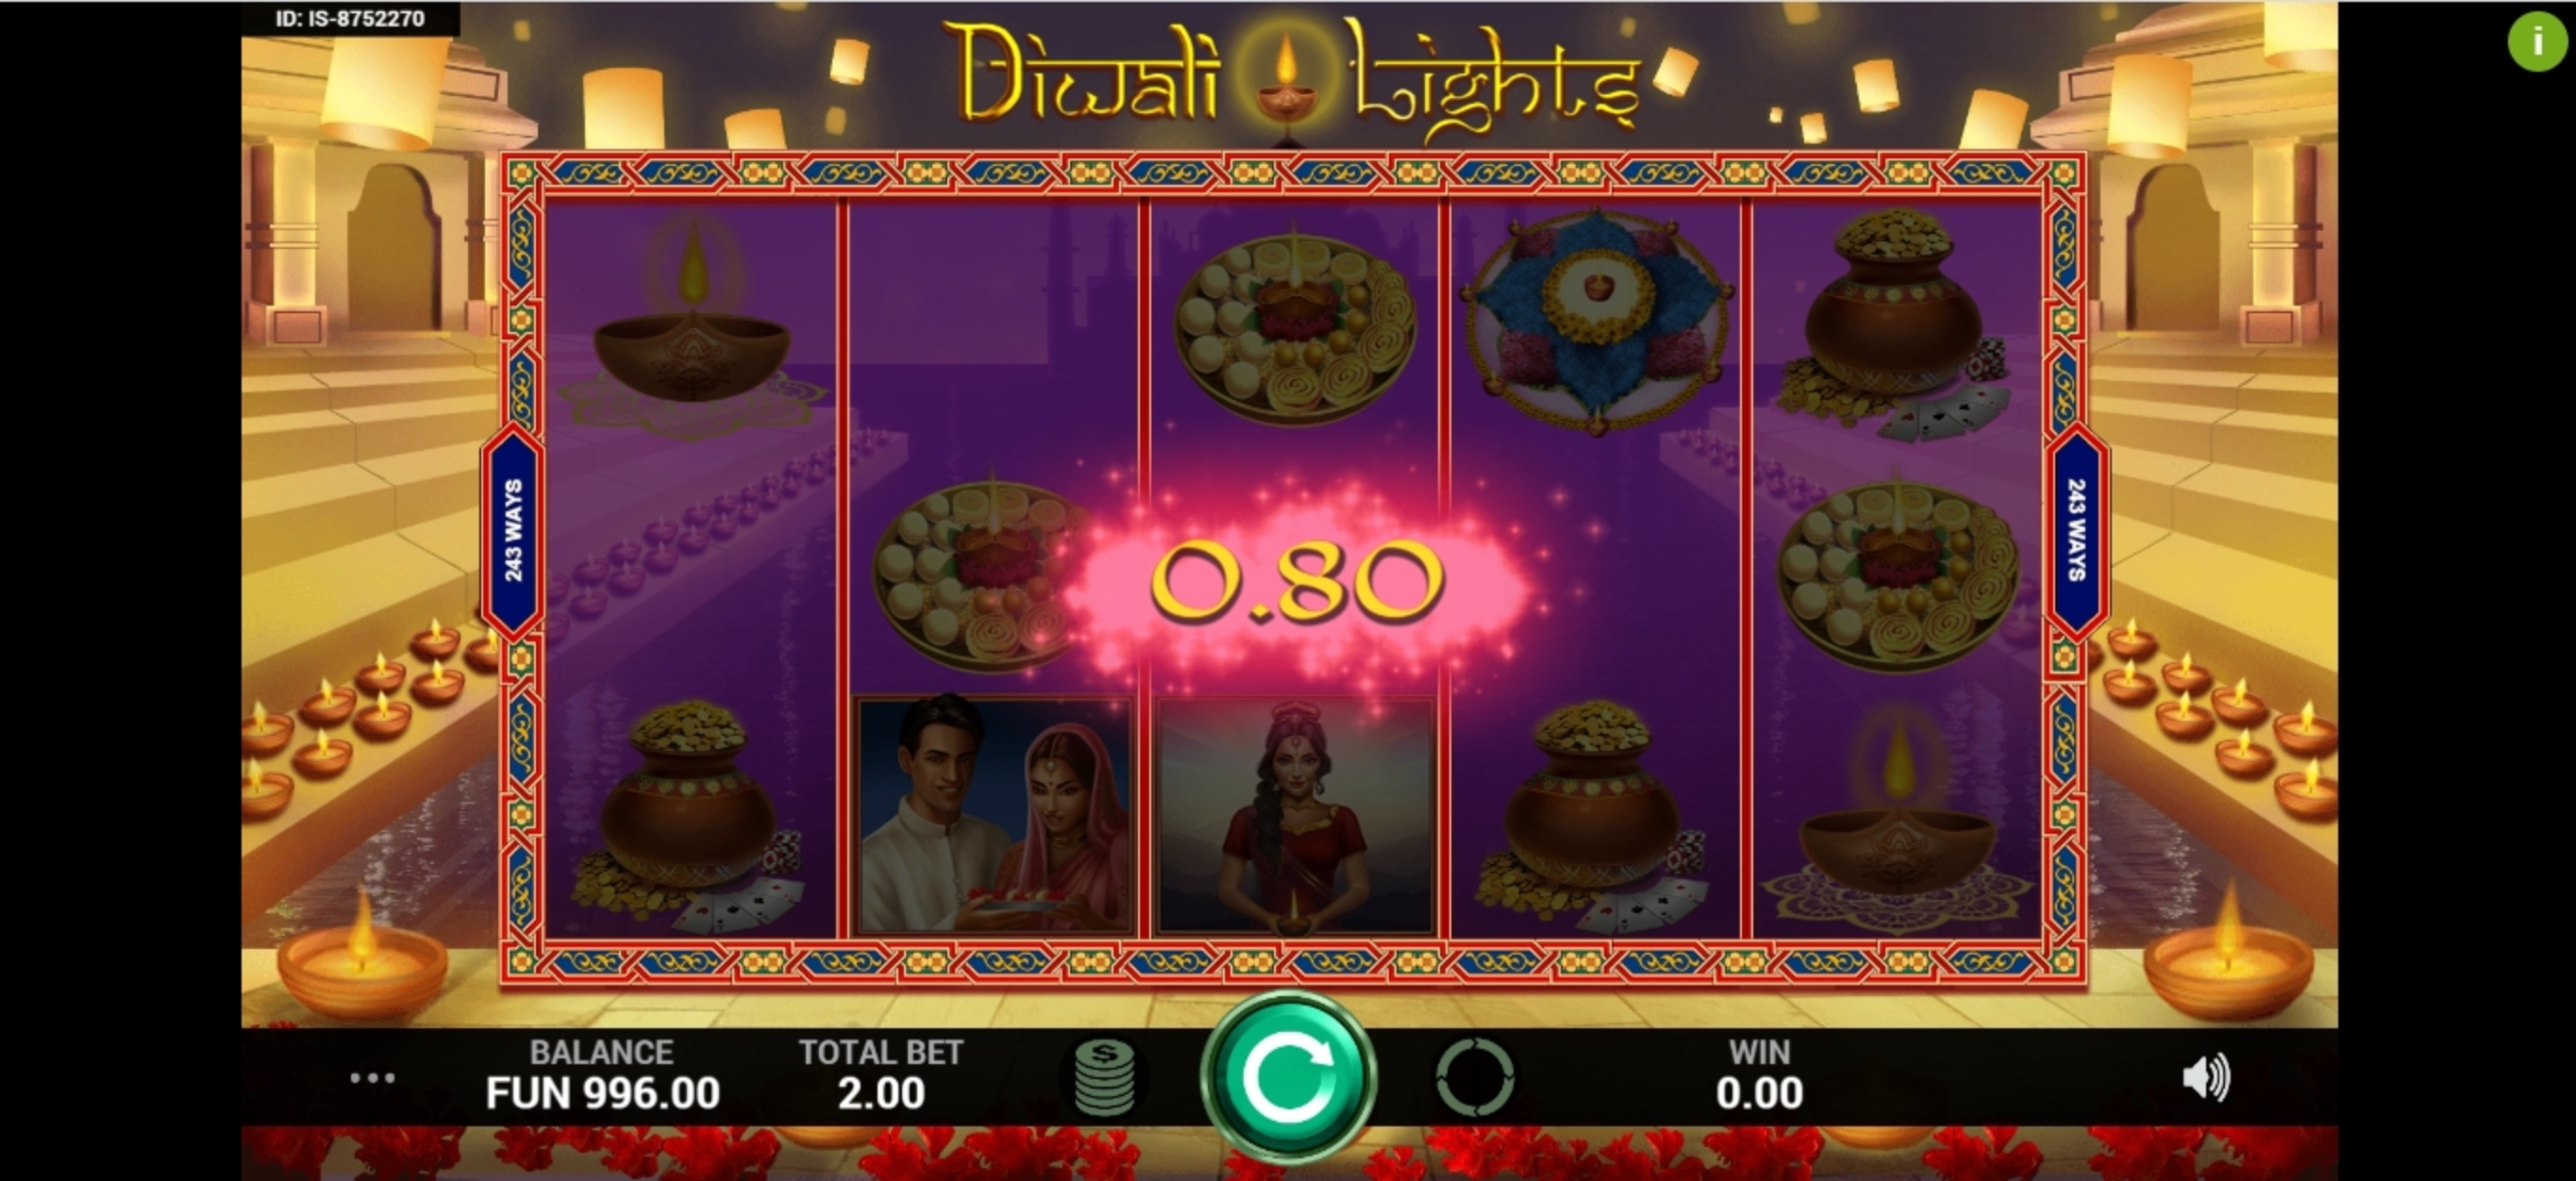 Win Money in Diwali Lights Free Slot Game by Indi Slots